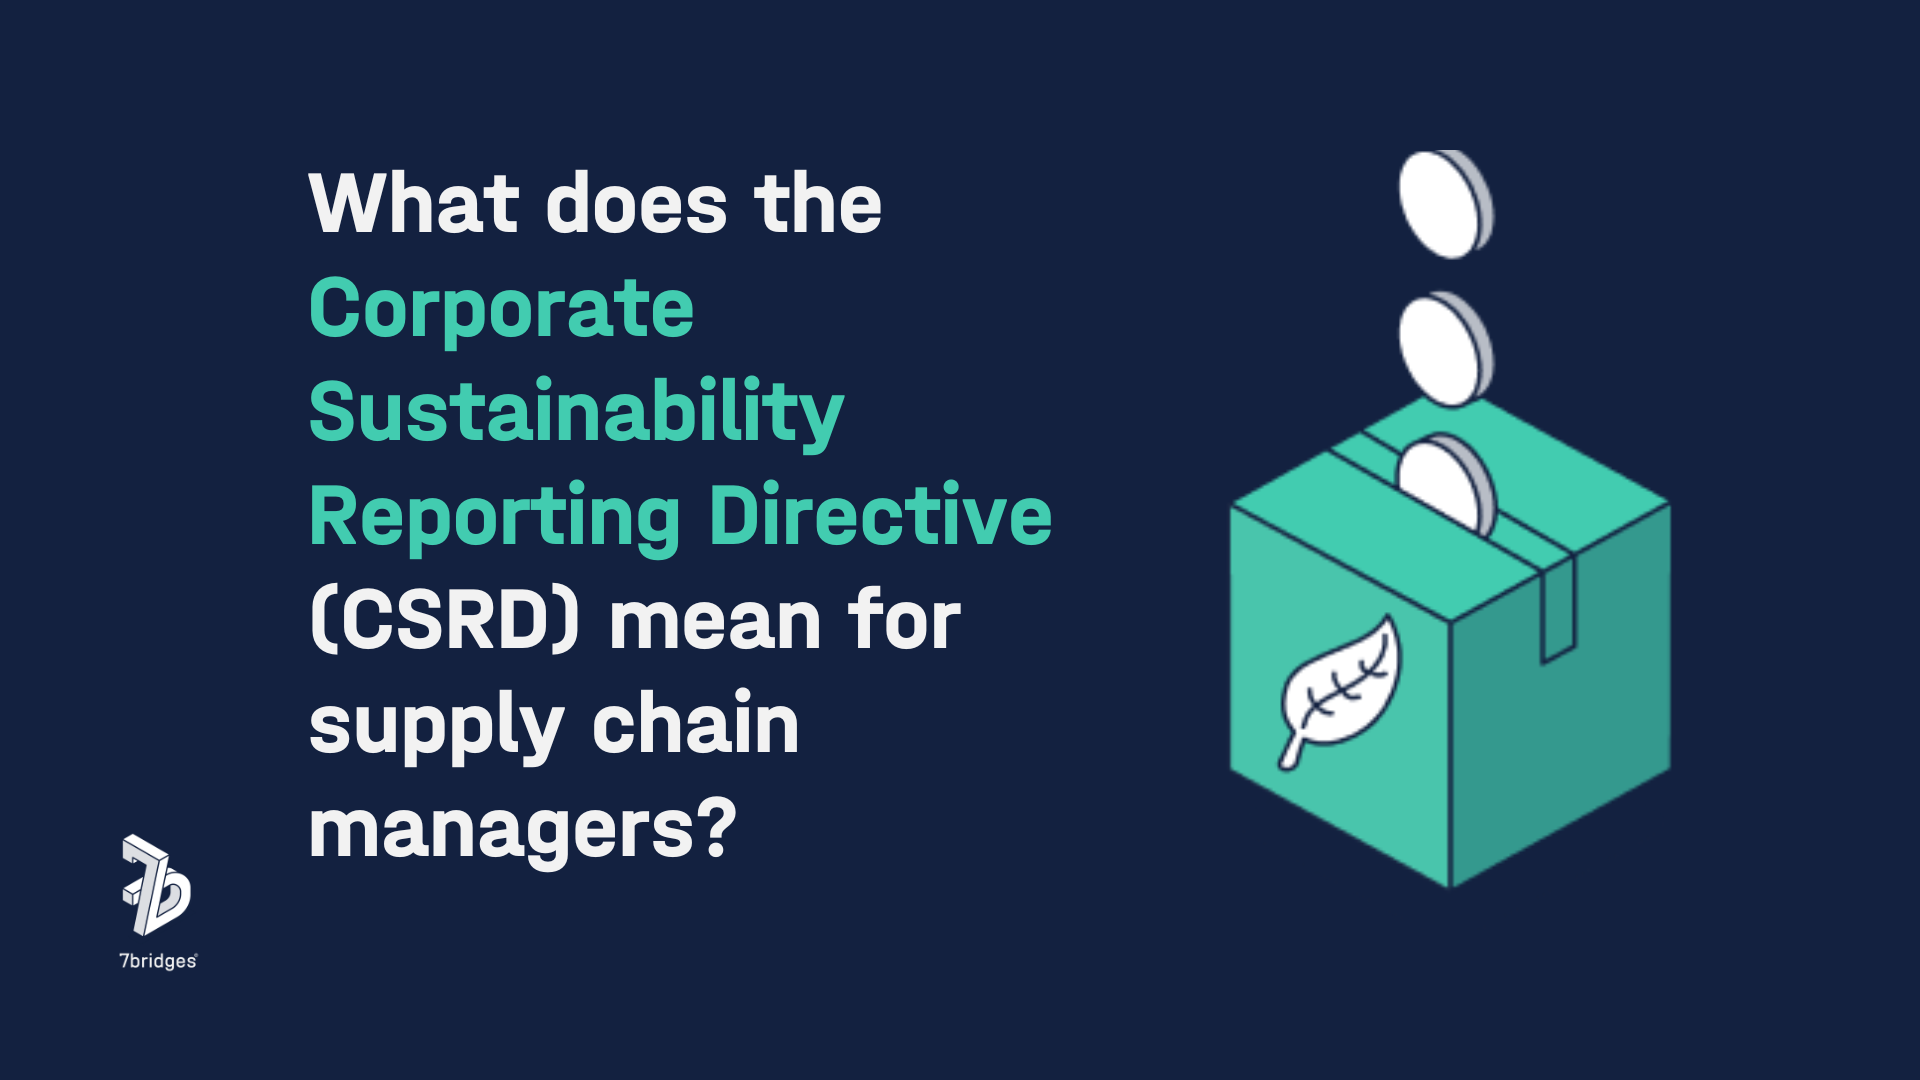 Corporate Sustainability Reporting Directive blog title with image of coins being fed into a green box with a leaf on it on a dark blu background